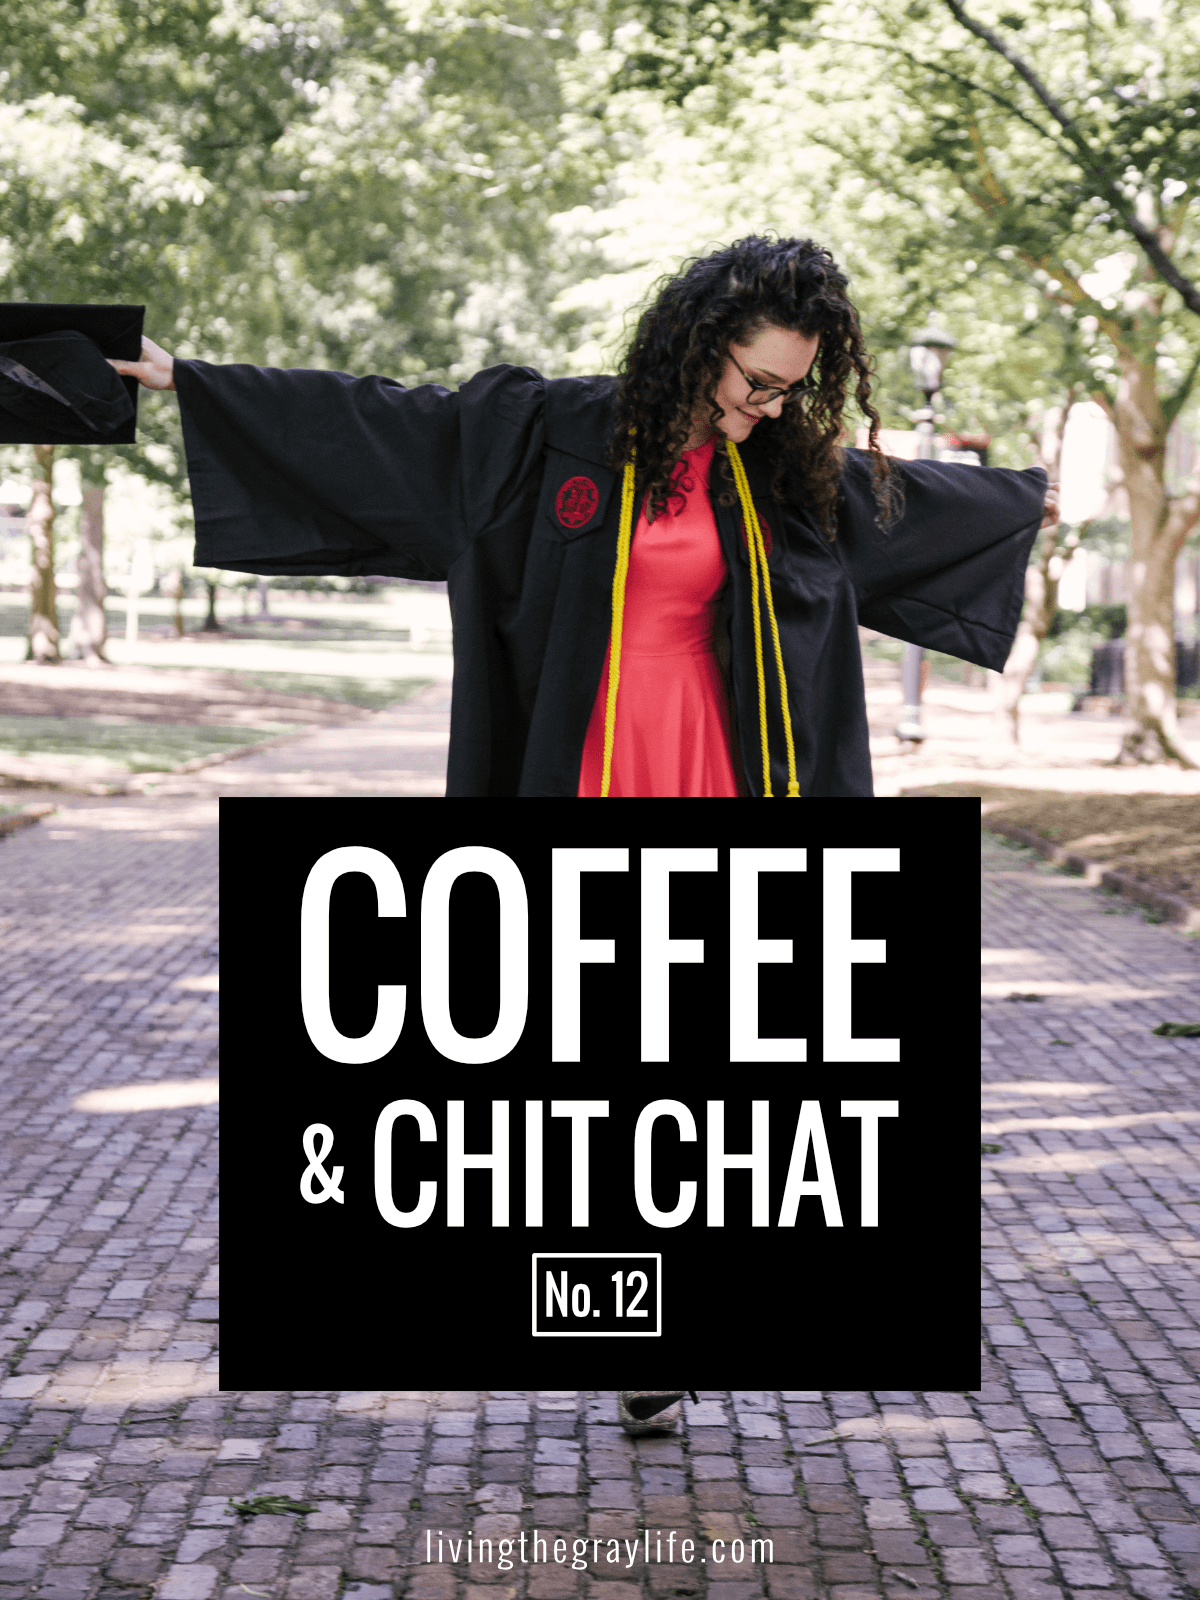 Graduation, Moving, & More Plants | Coffee & Chit Chat No. 12